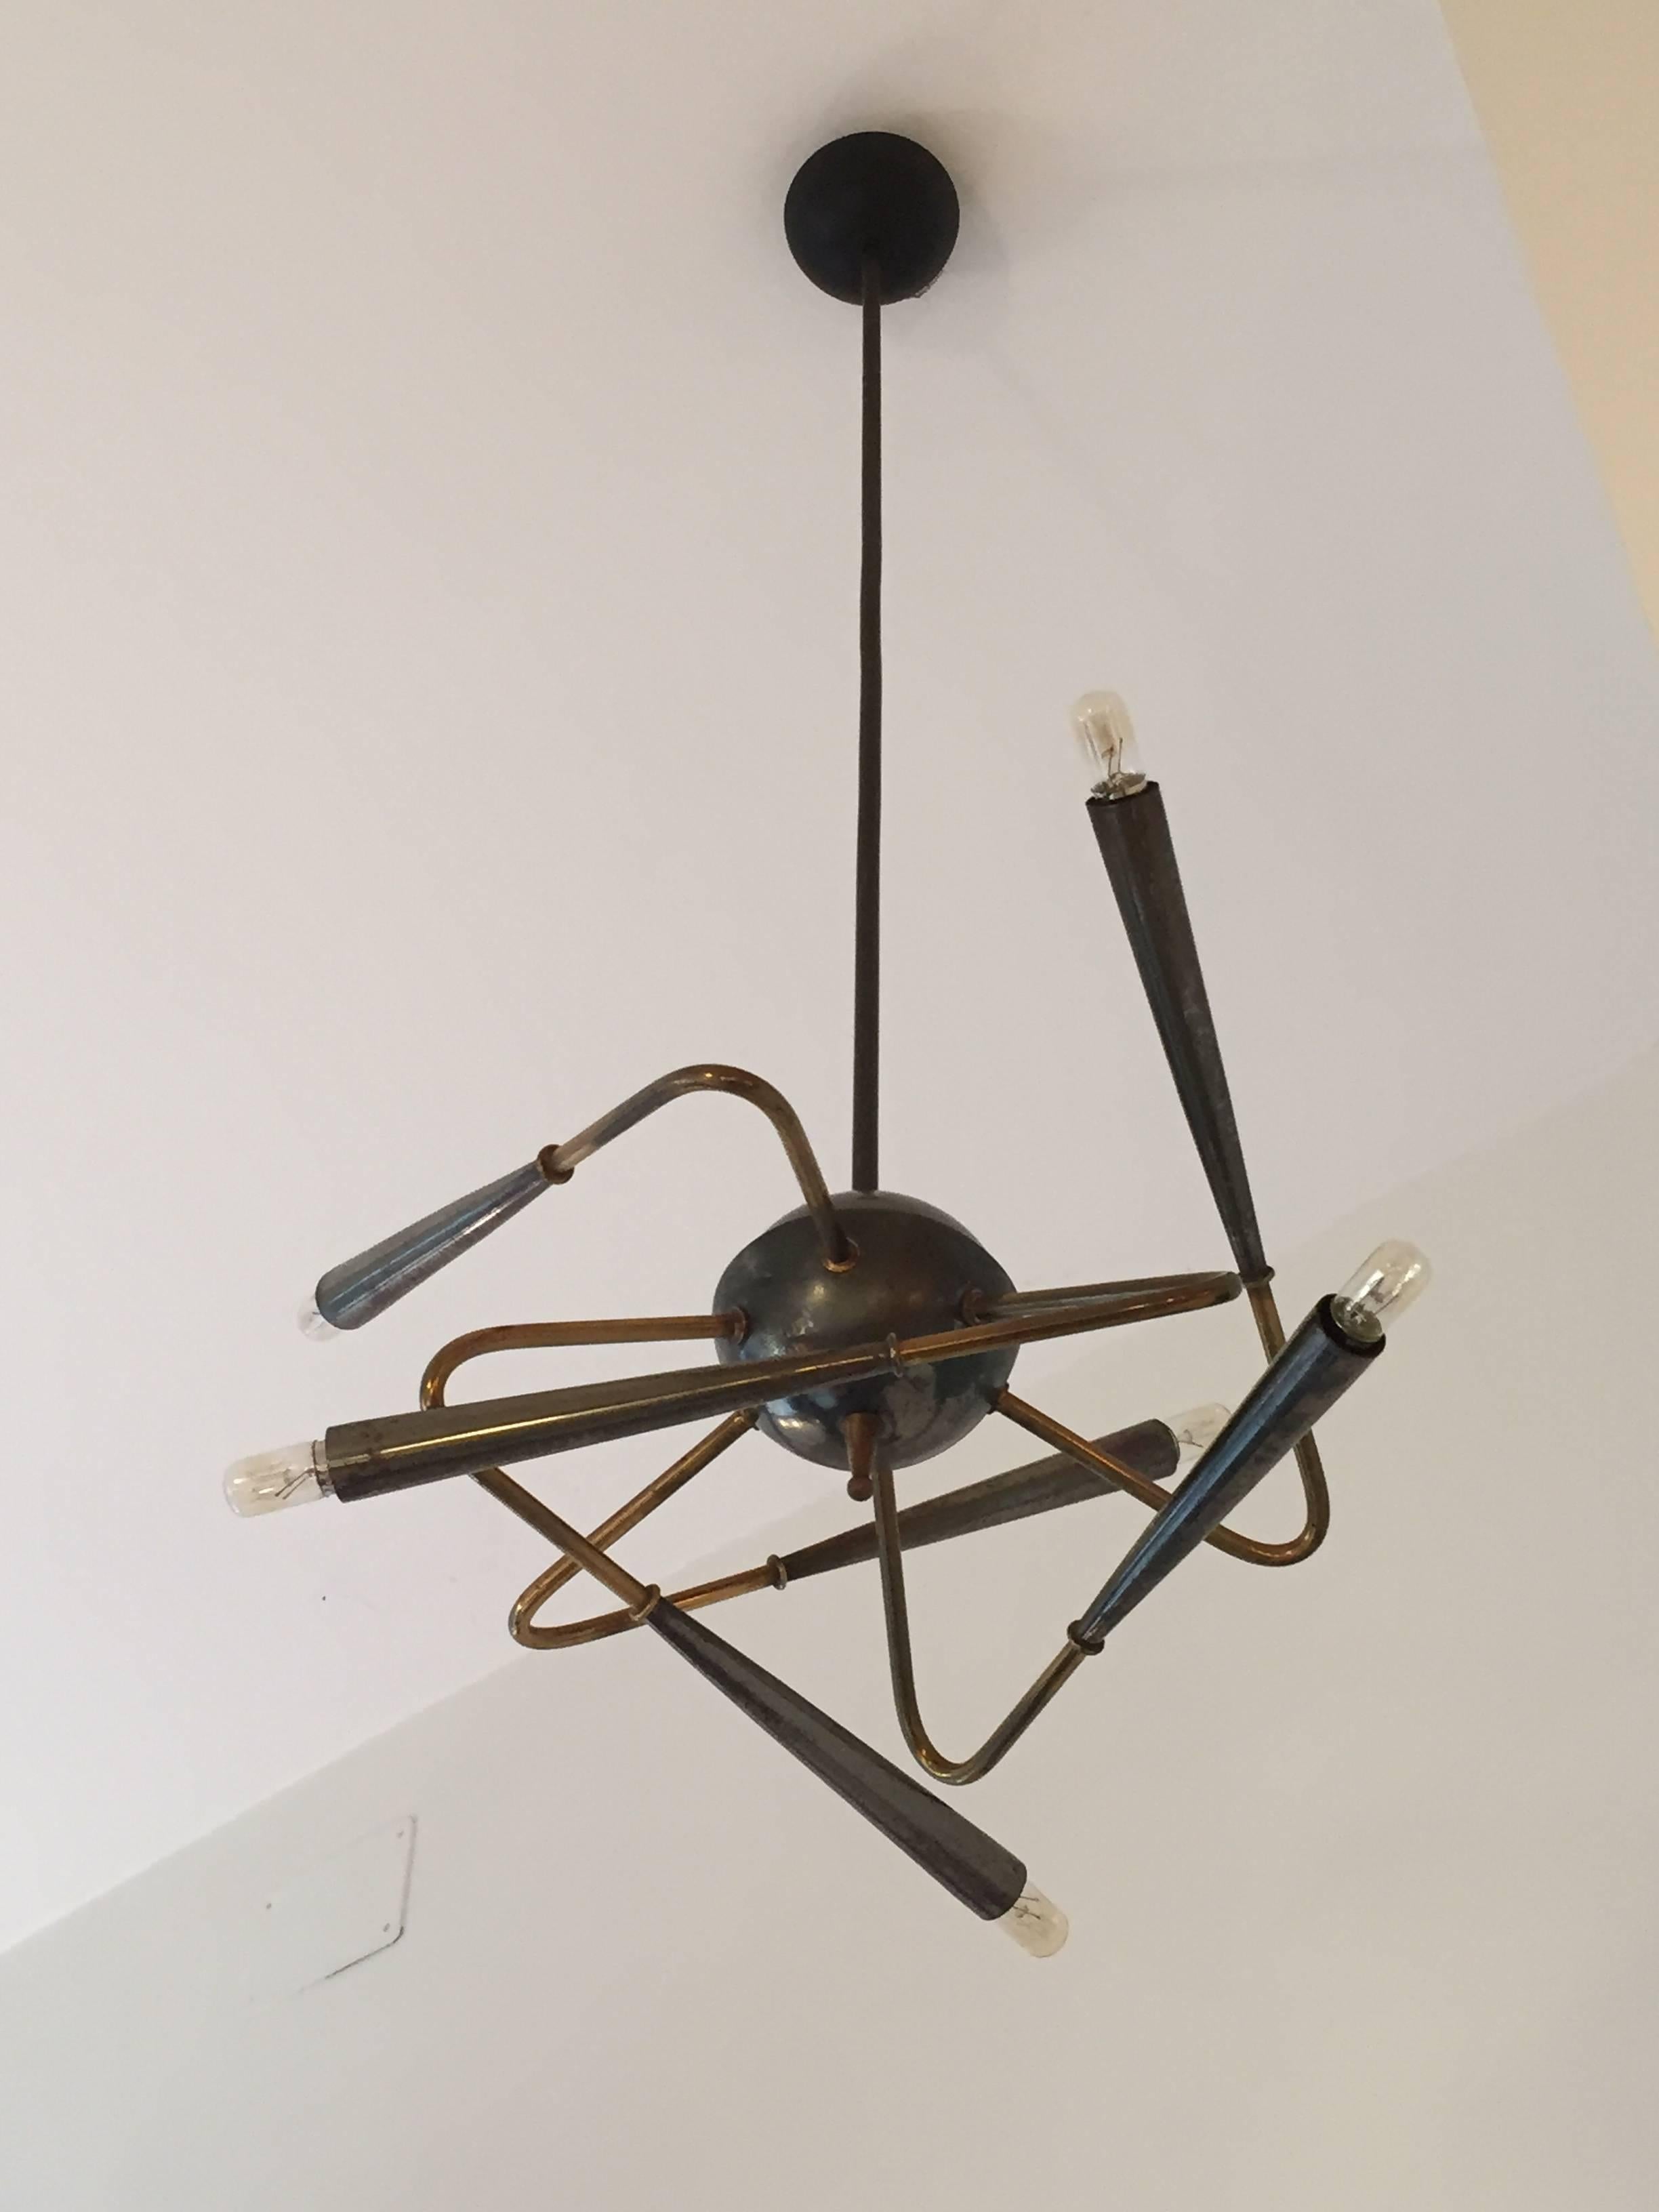 A entirely original 1950 Stilnovo chandelier. Brass and metal frame, six arms and reflectors. No reedition. Excellent condition.